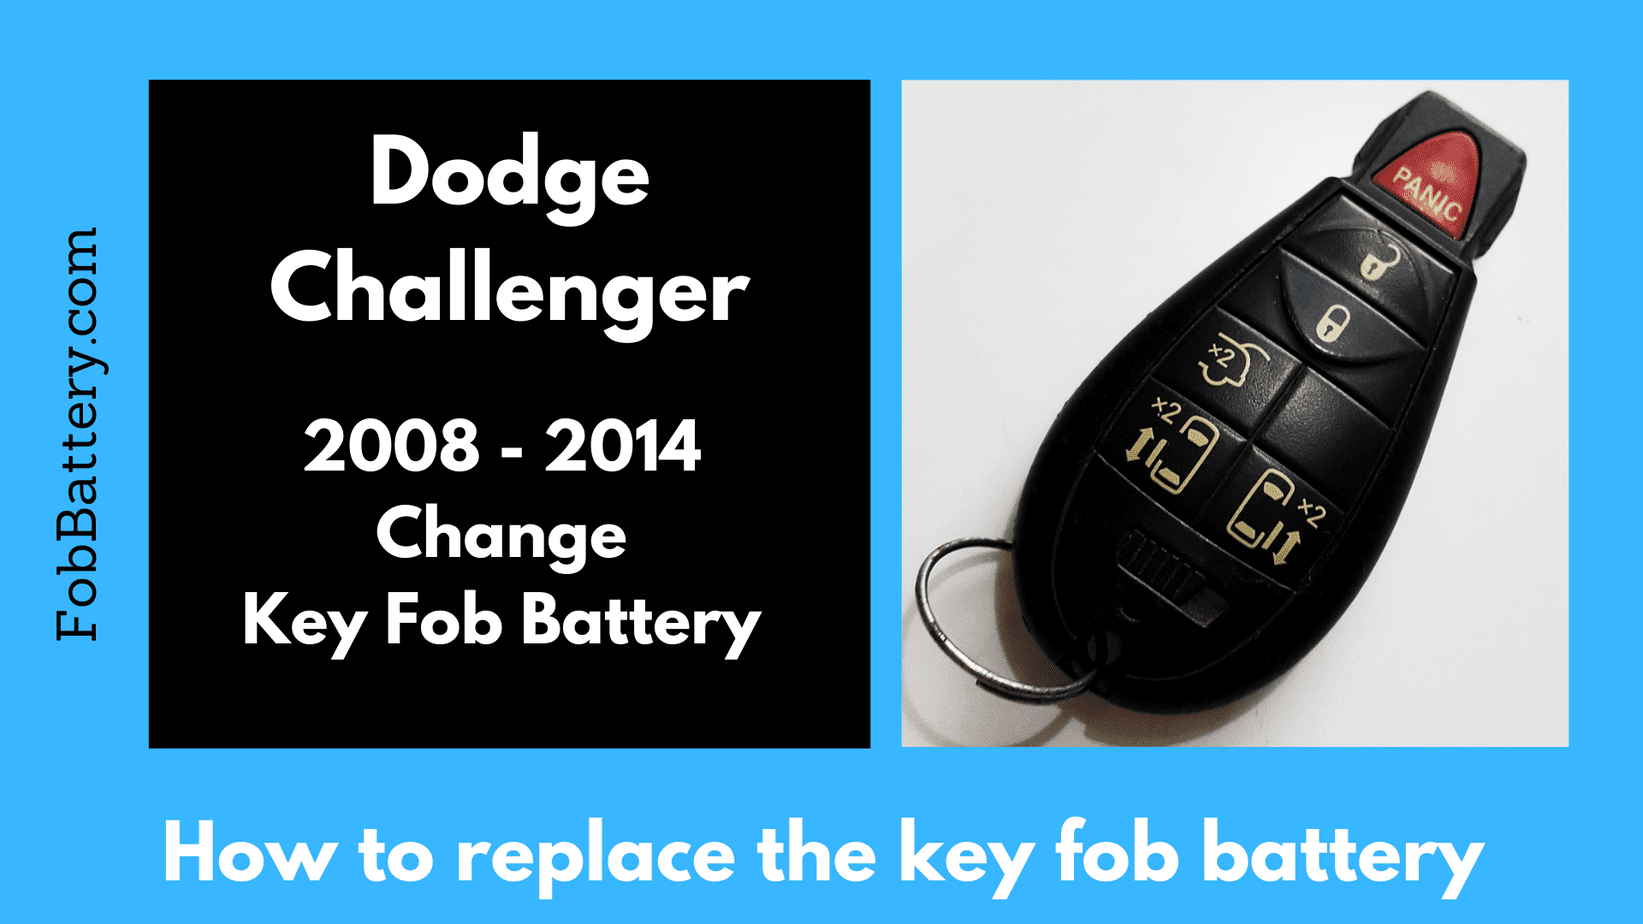 Dodge challenger key fob battery replacement